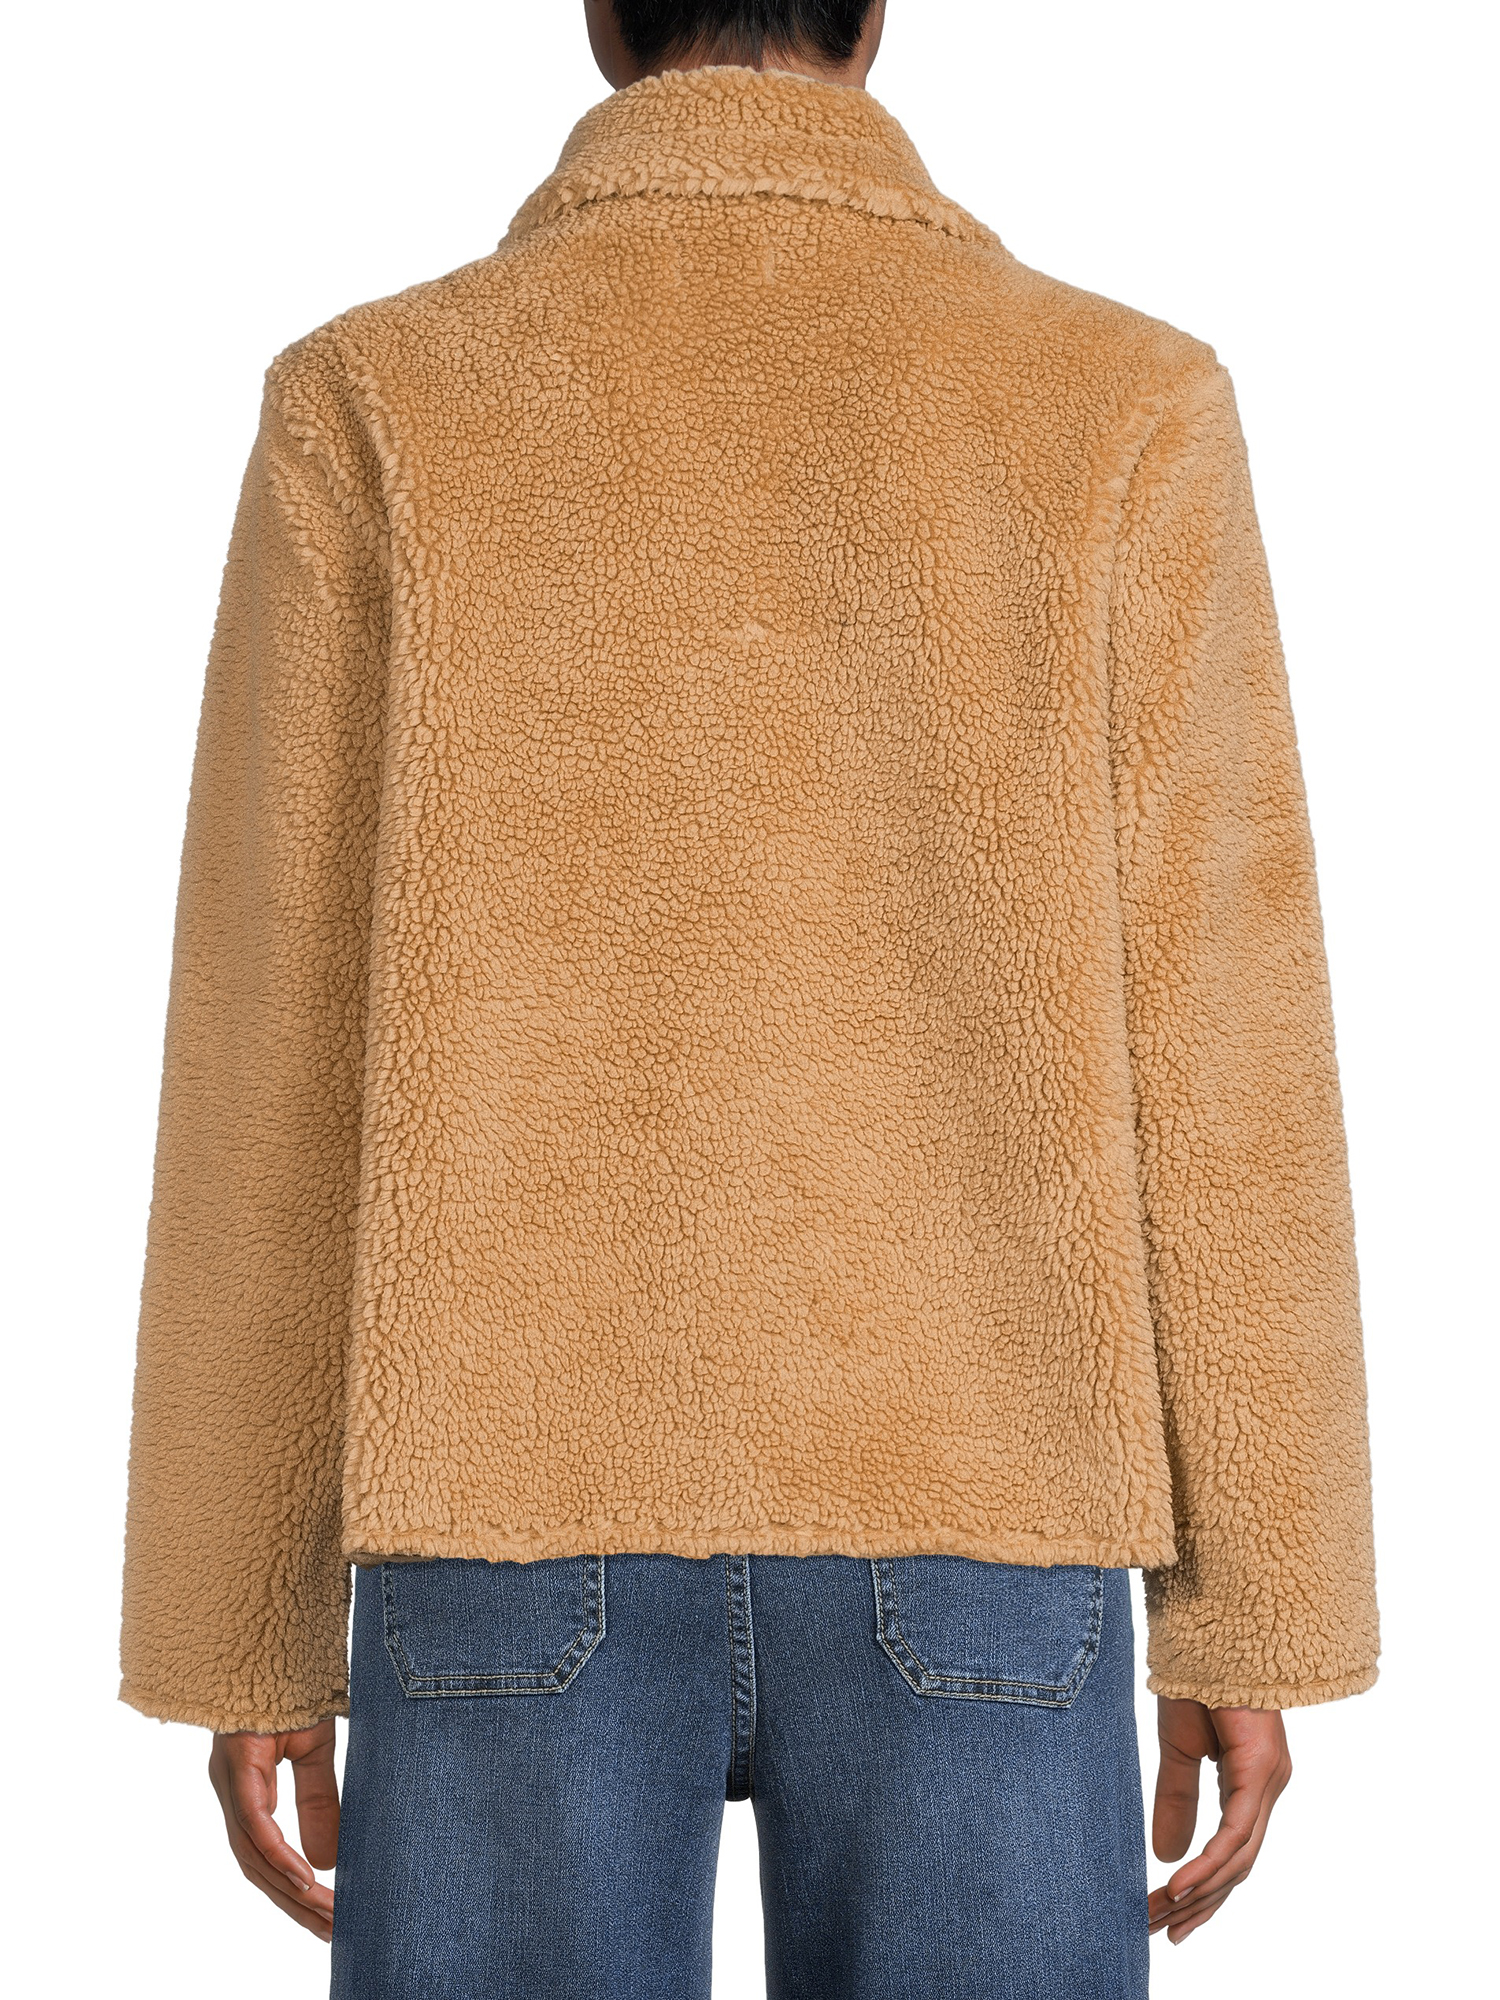 Time and Tru Women's Sherpa Jacket - image 3 of 5